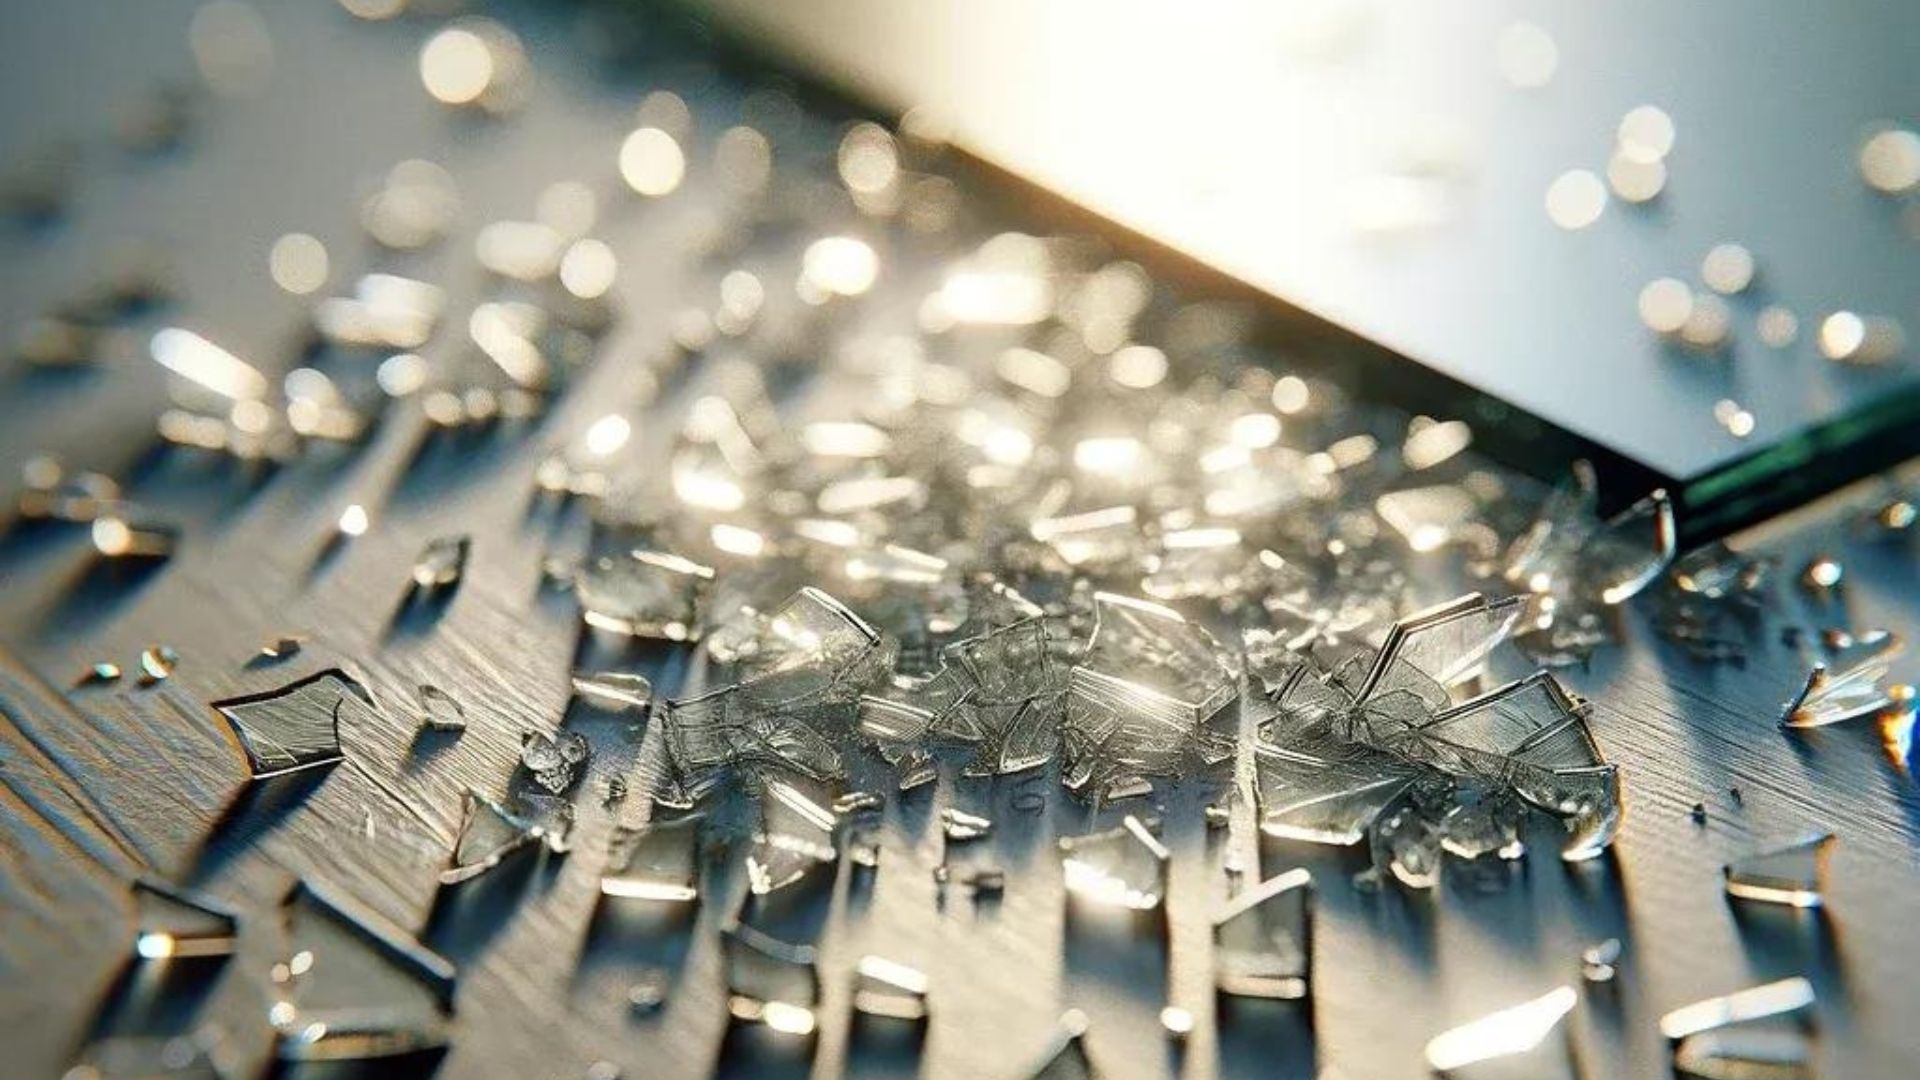 Toughened glass shatters into small pieces rather than large shards. Find out why in this 5-minute 